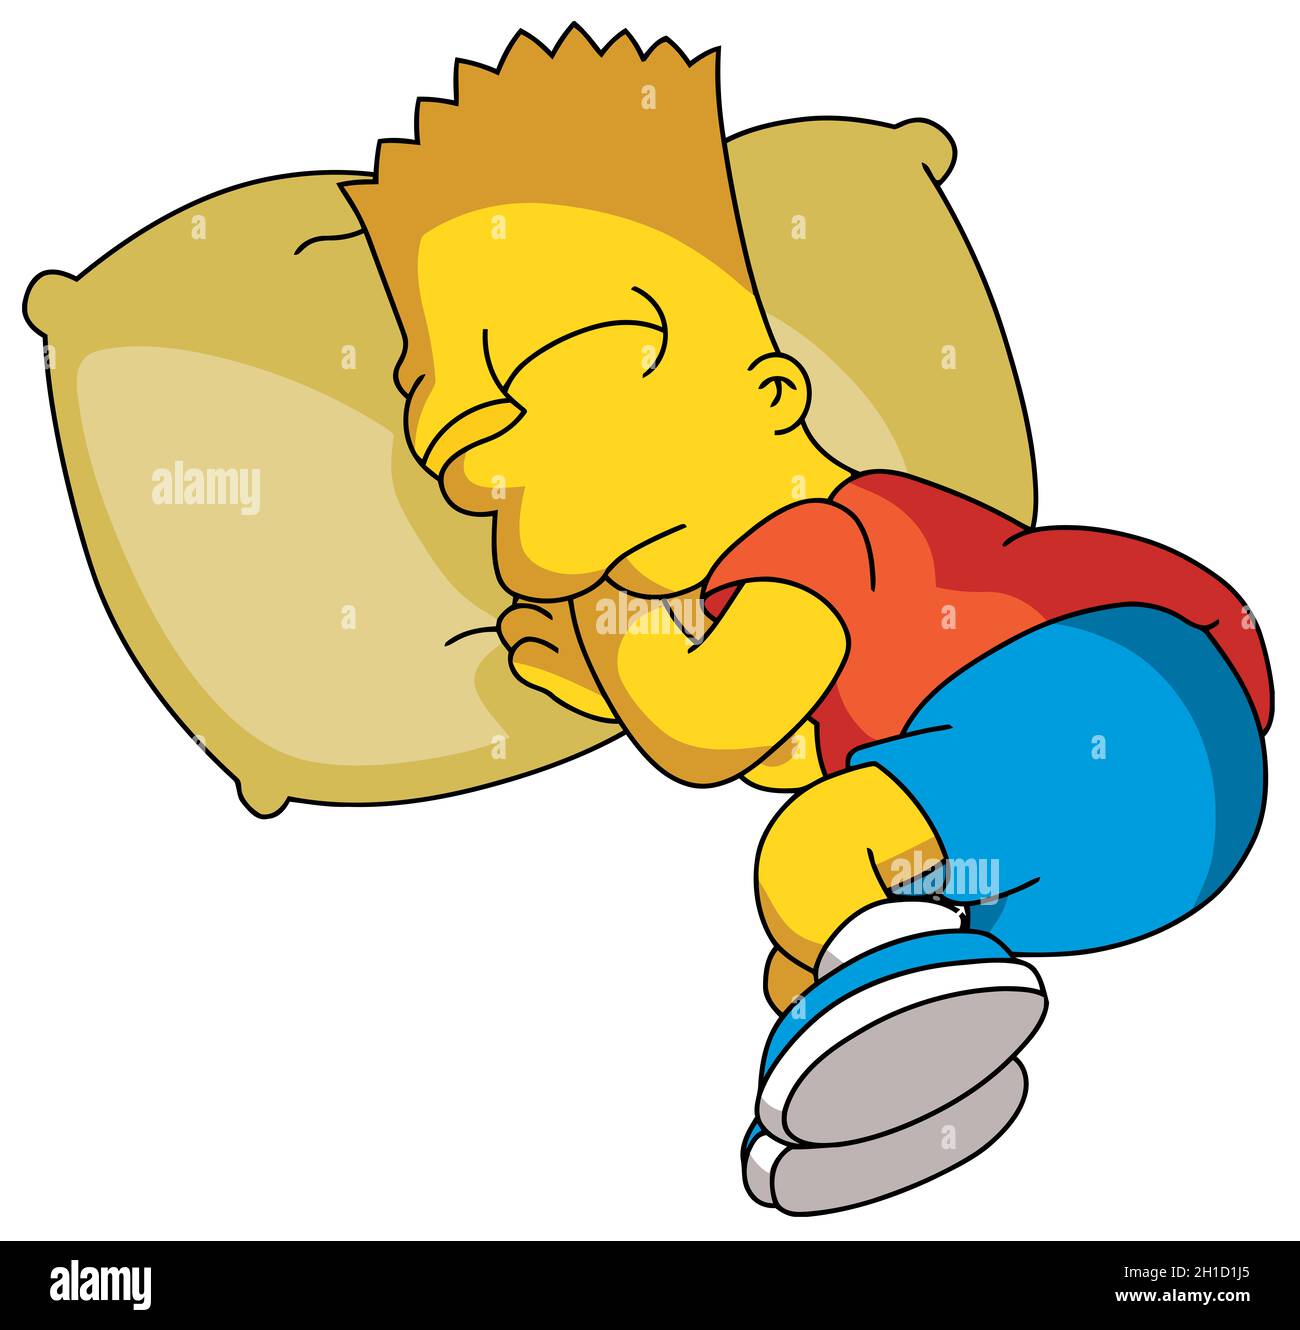 Bart The Simpsons Dreaming Sleeping Illustration dessin animé éditorial Banque D'Images